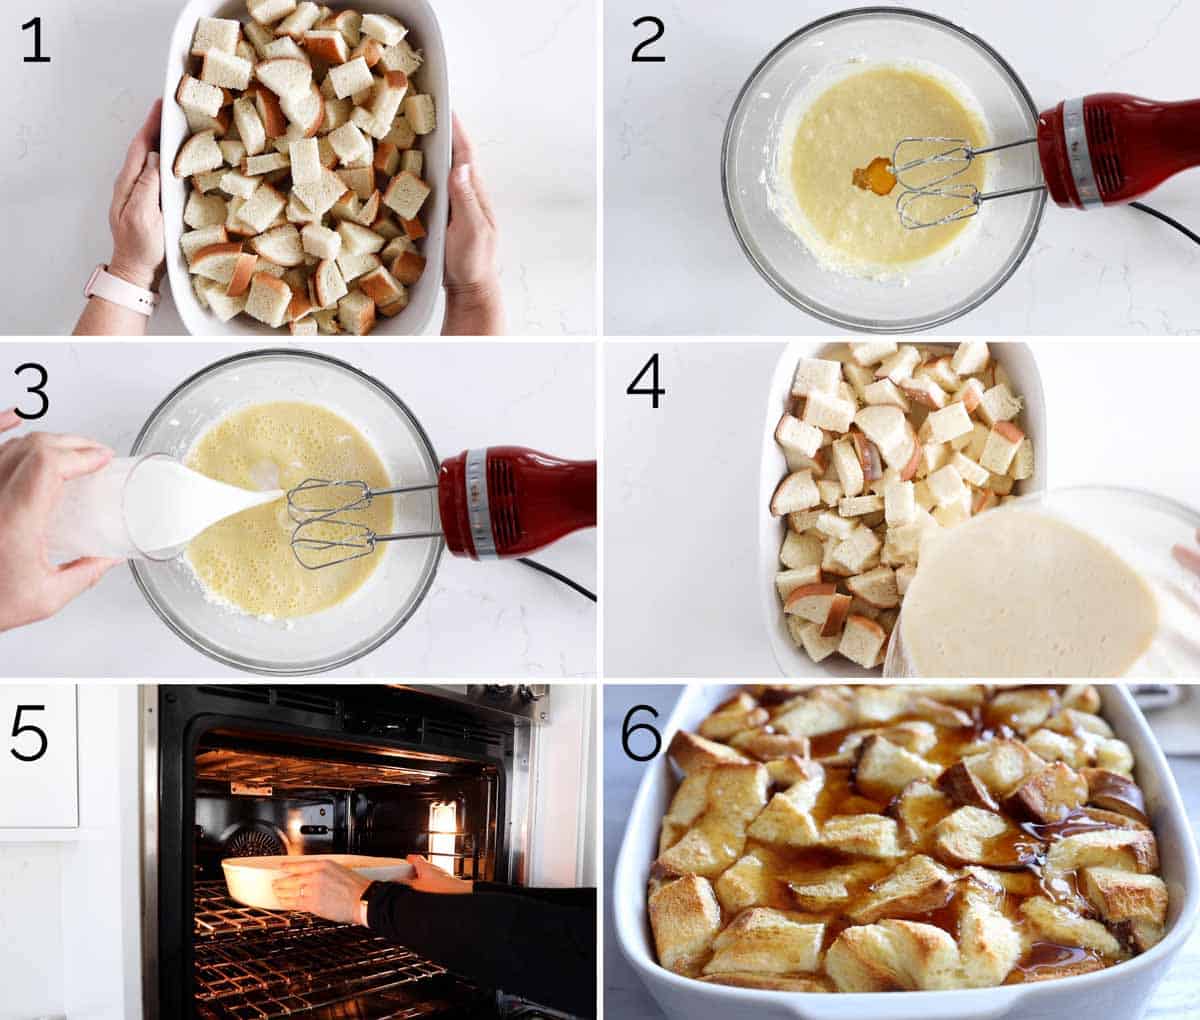 Steps to make overnight French toast casserole.